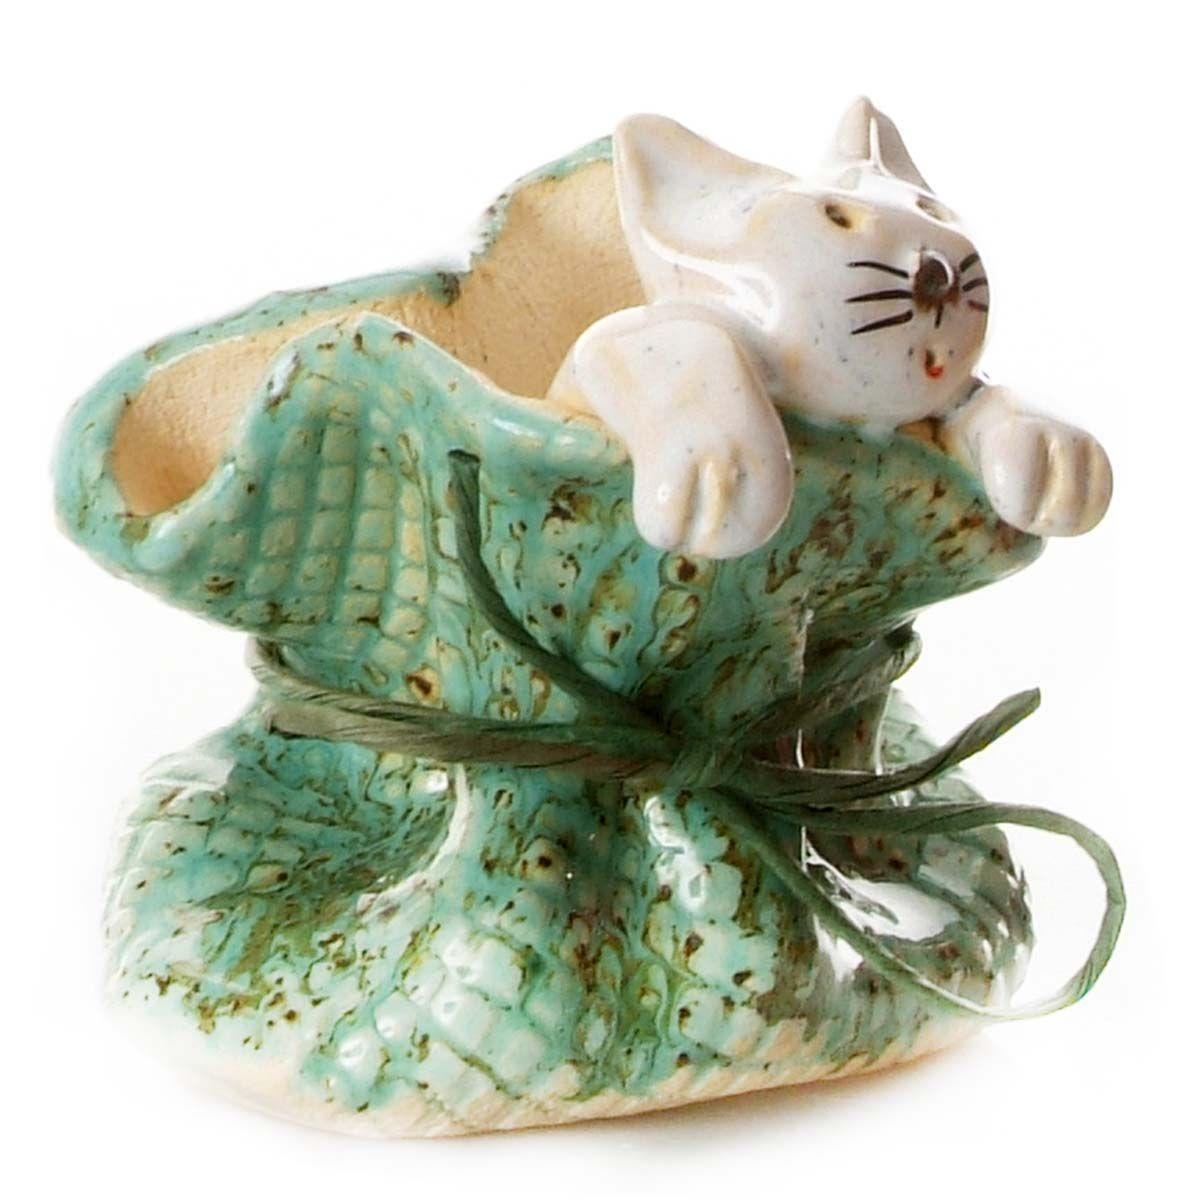 Quirky Cat in a Sack Ornament with Grey Tabby Cat